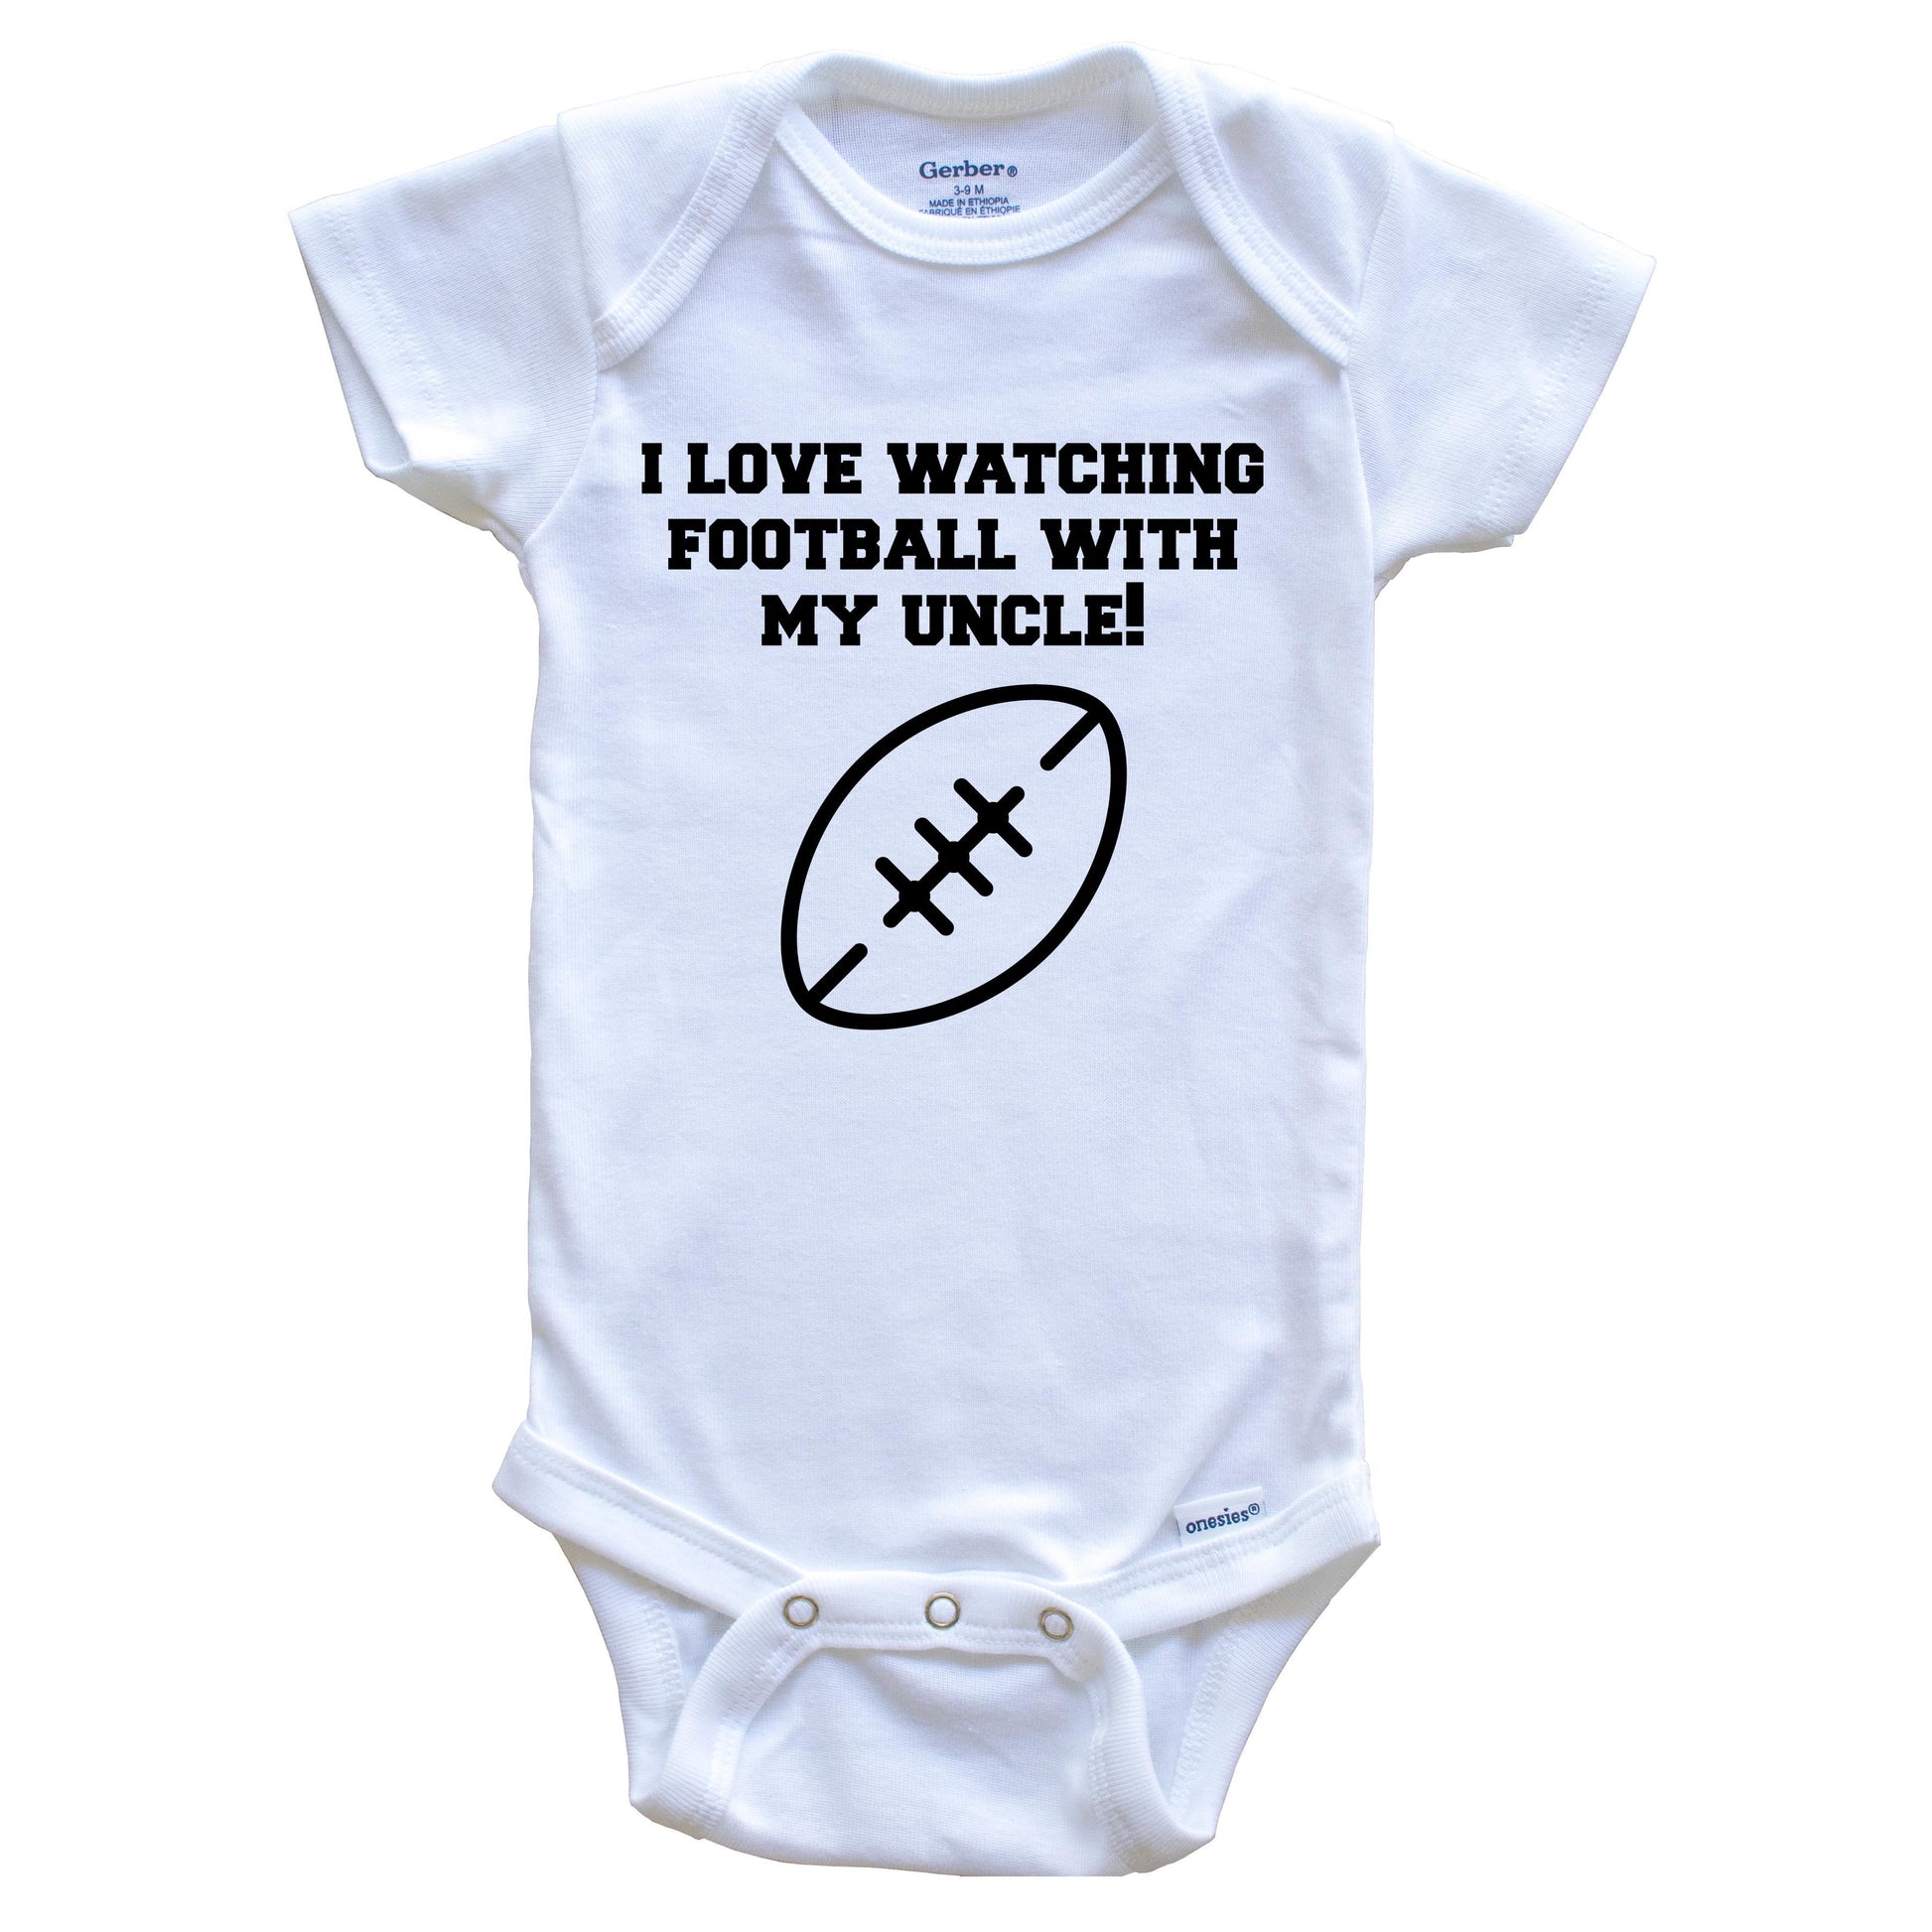 I Love Watching Football With My Uncle Baby Onesie - One Piece Baby Bodysuit